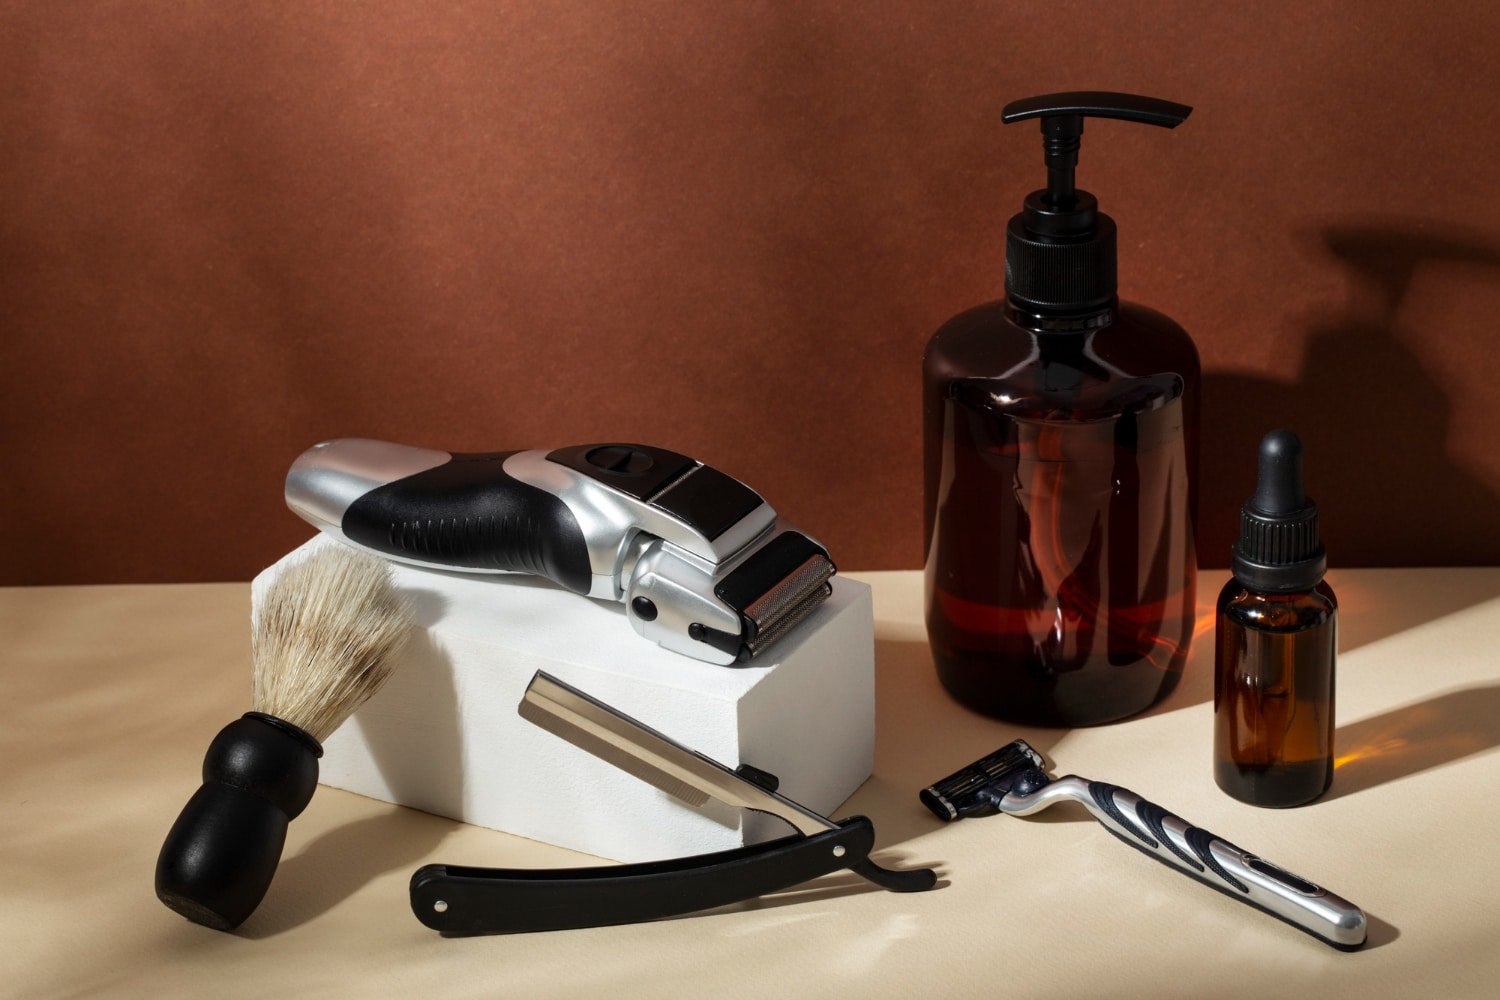 Upgrade Your Grooming Routine With Every Man Jack’s Natural Men’s Grooming Products